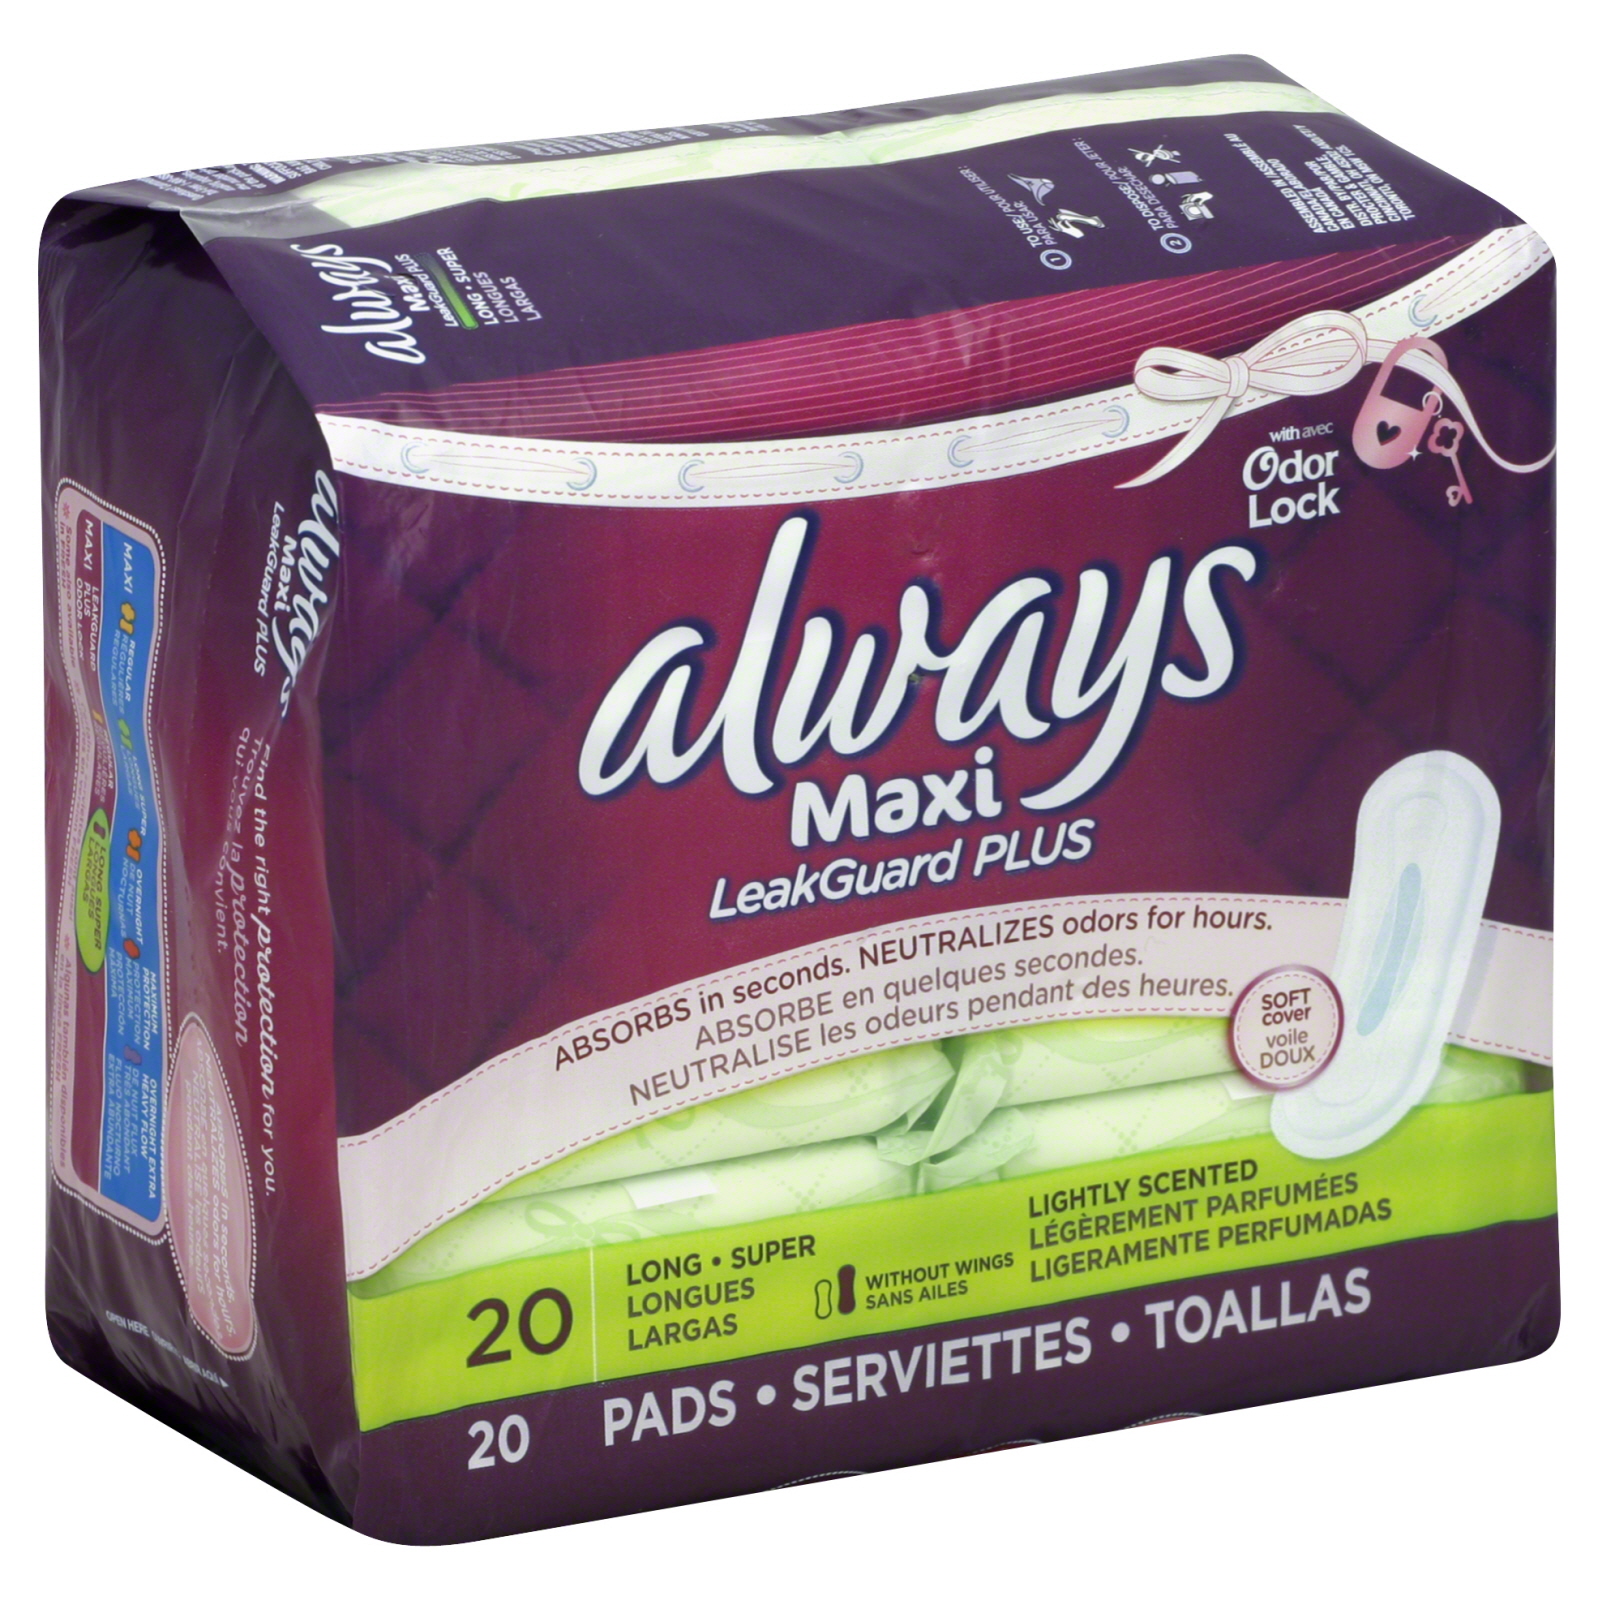 Always Pads, Maxi, Long-Super, Lightly Scented 20 pads